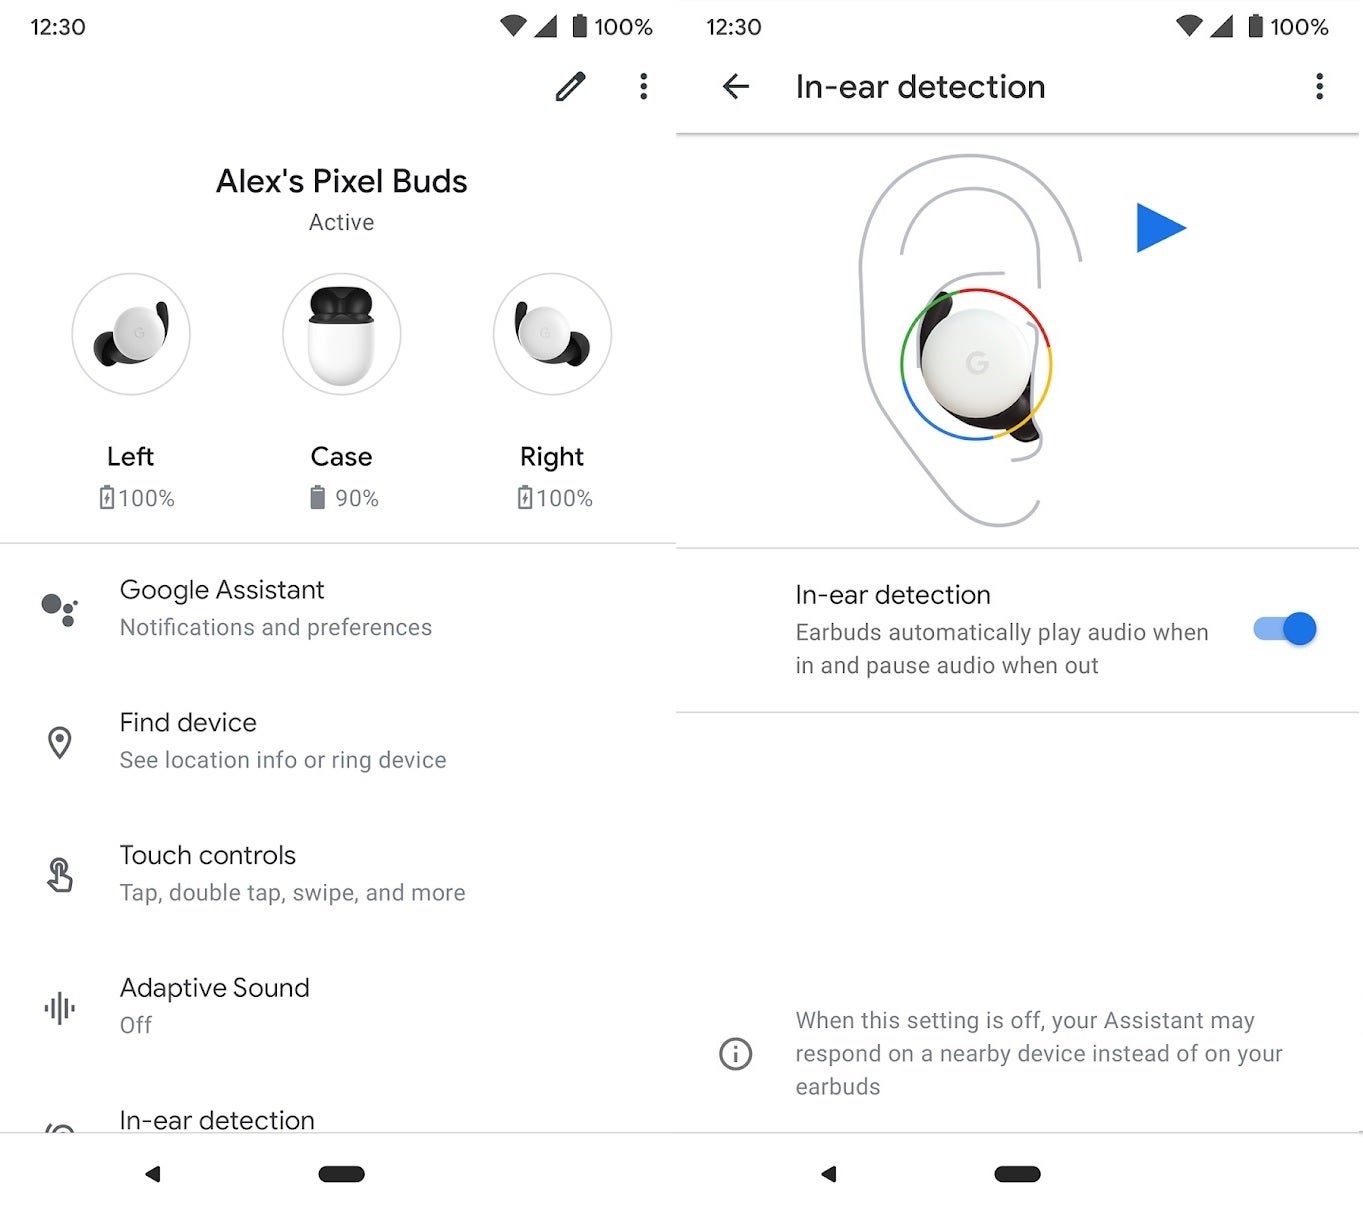 An app for the upcoming Pixel Buds is now listed in the Google Play Store - Google launches app for the Pixel Buds